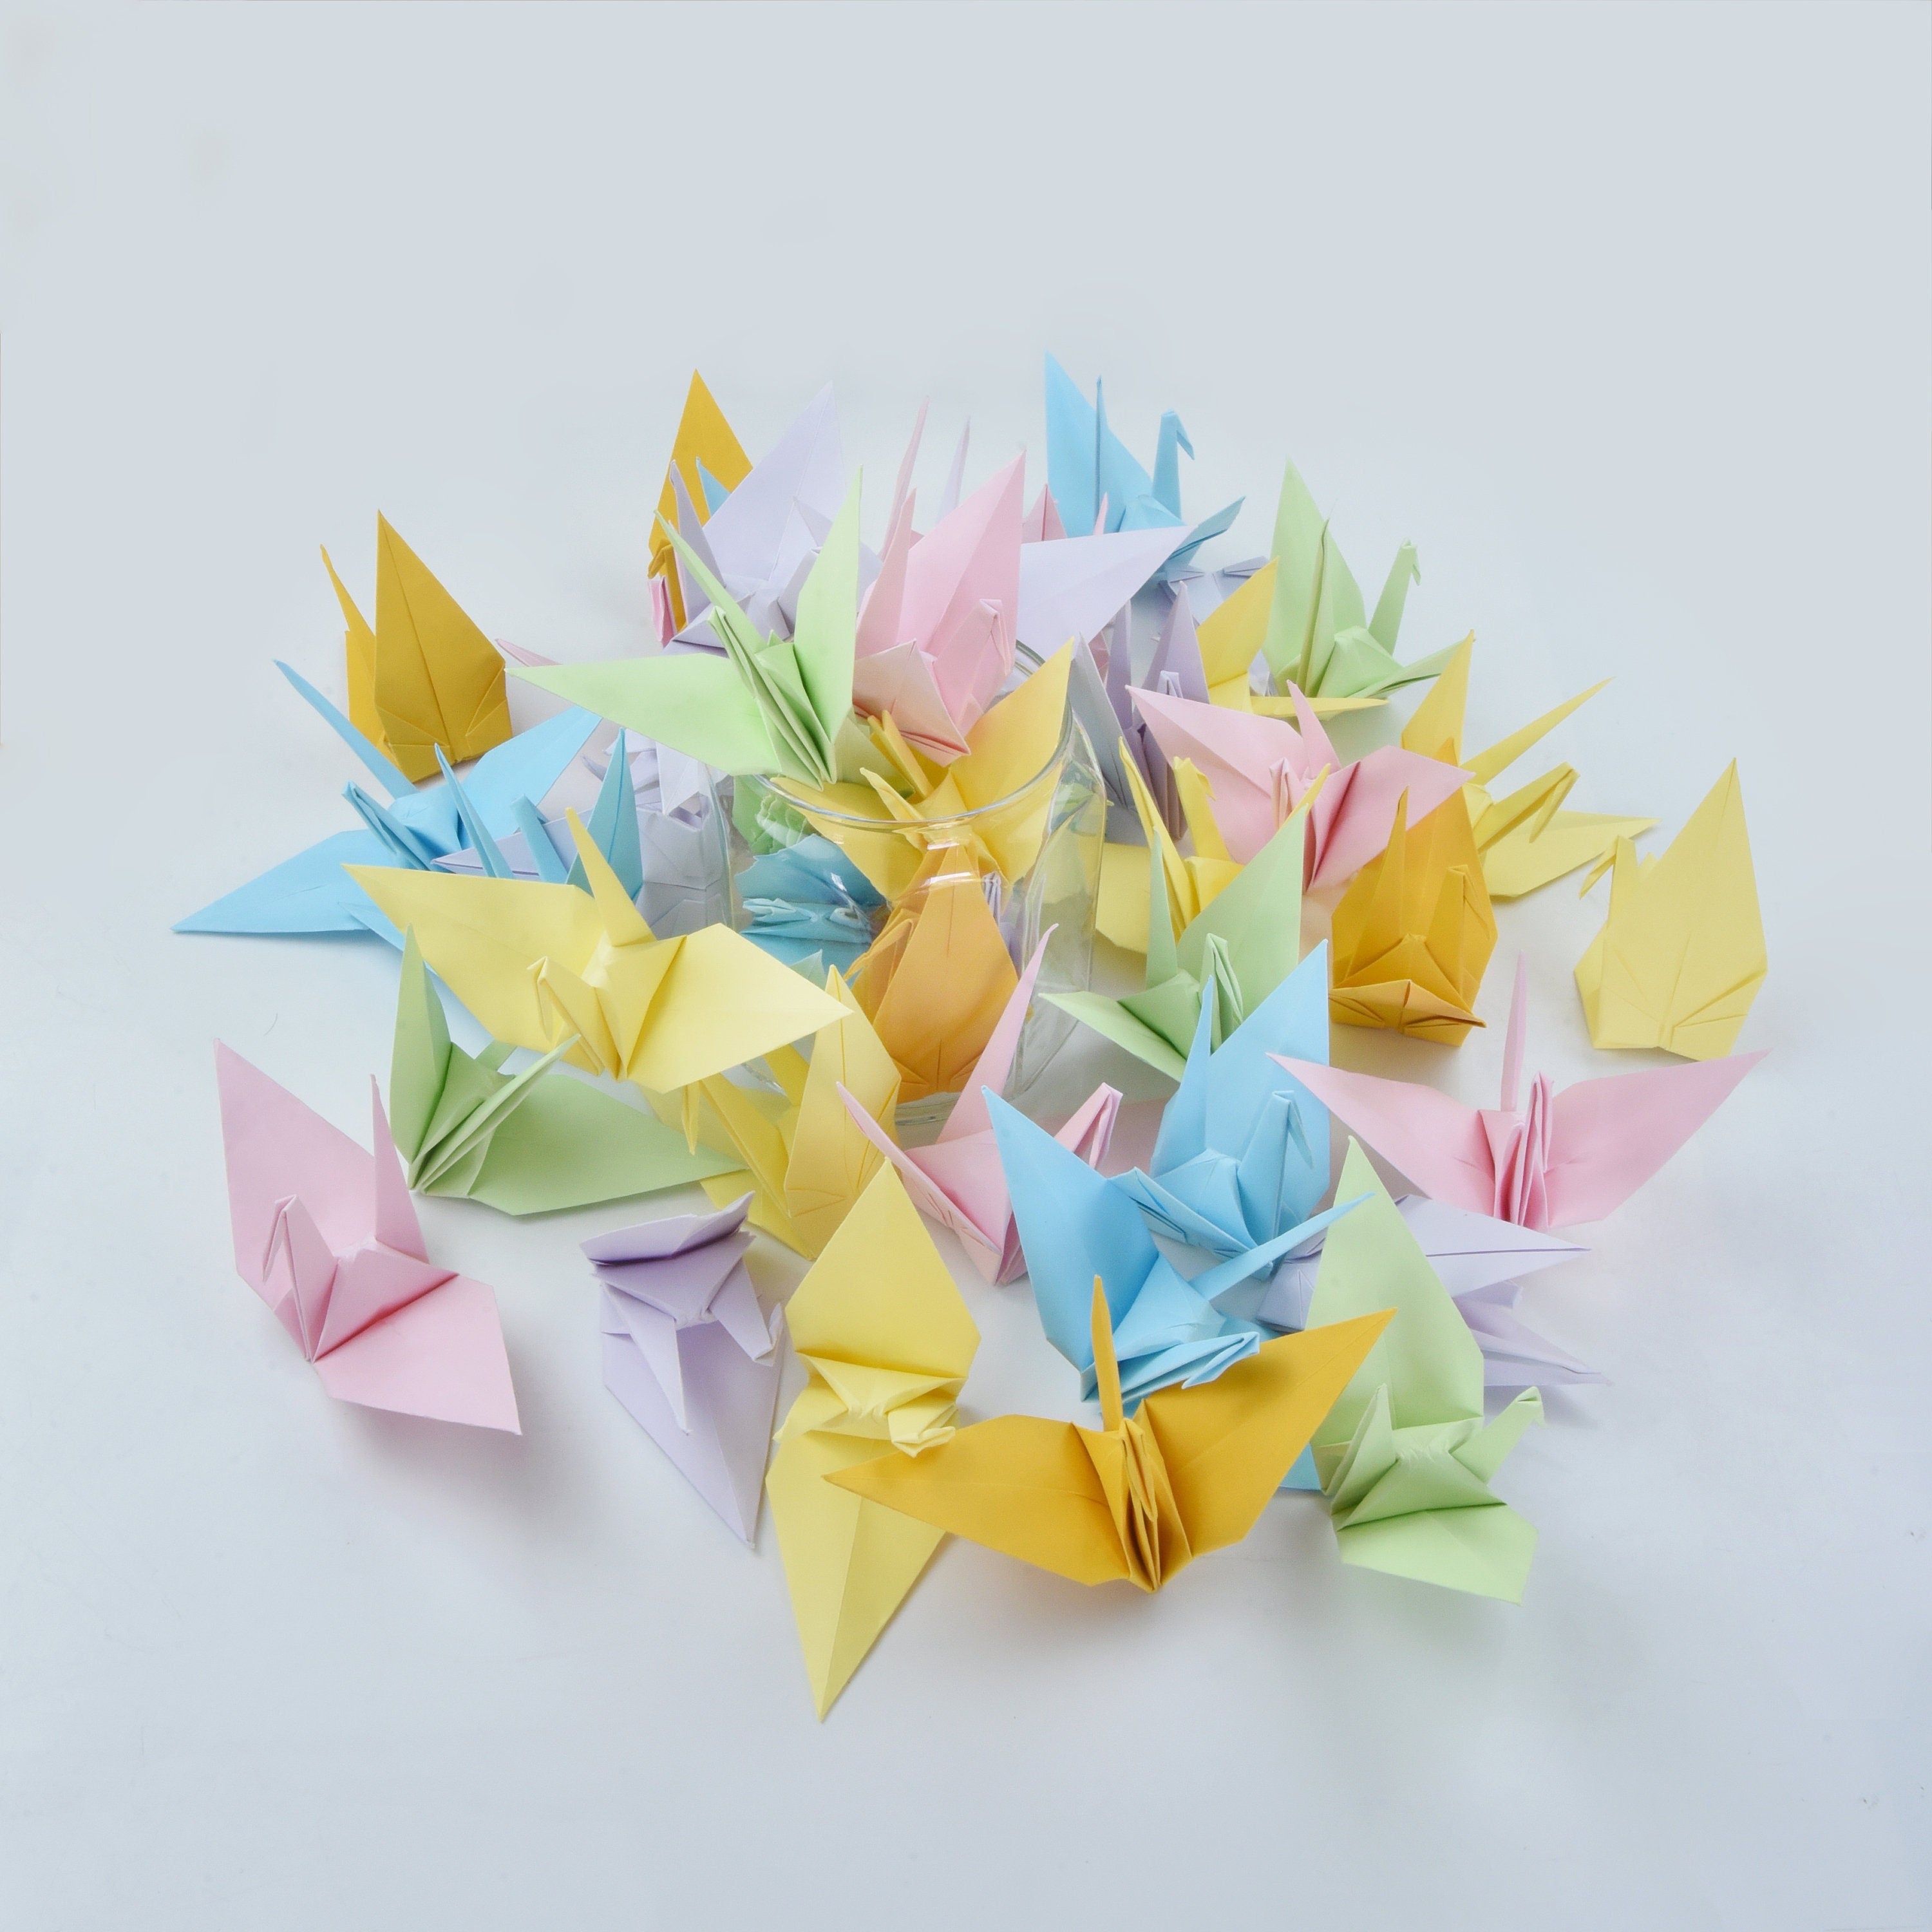 1000 Origami Paper Cranes Mixed color Sweet color Large 6 inches Bird Origami Crane 15 cm 6 inches for Japanese Wedding gift